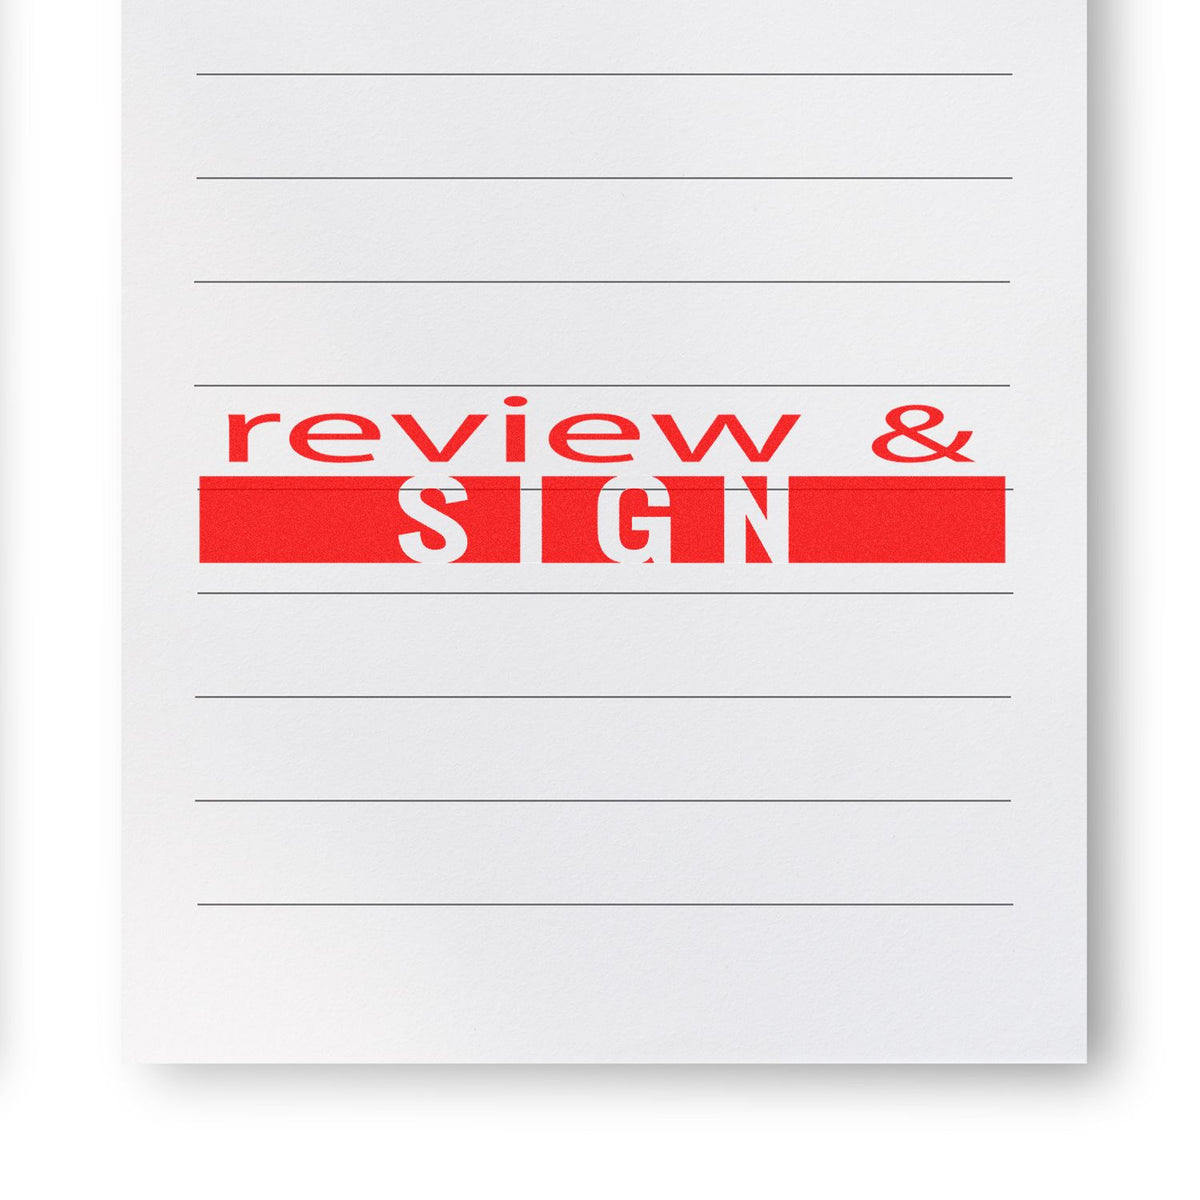 Review and Sign Rubber Stamp In Use Photo